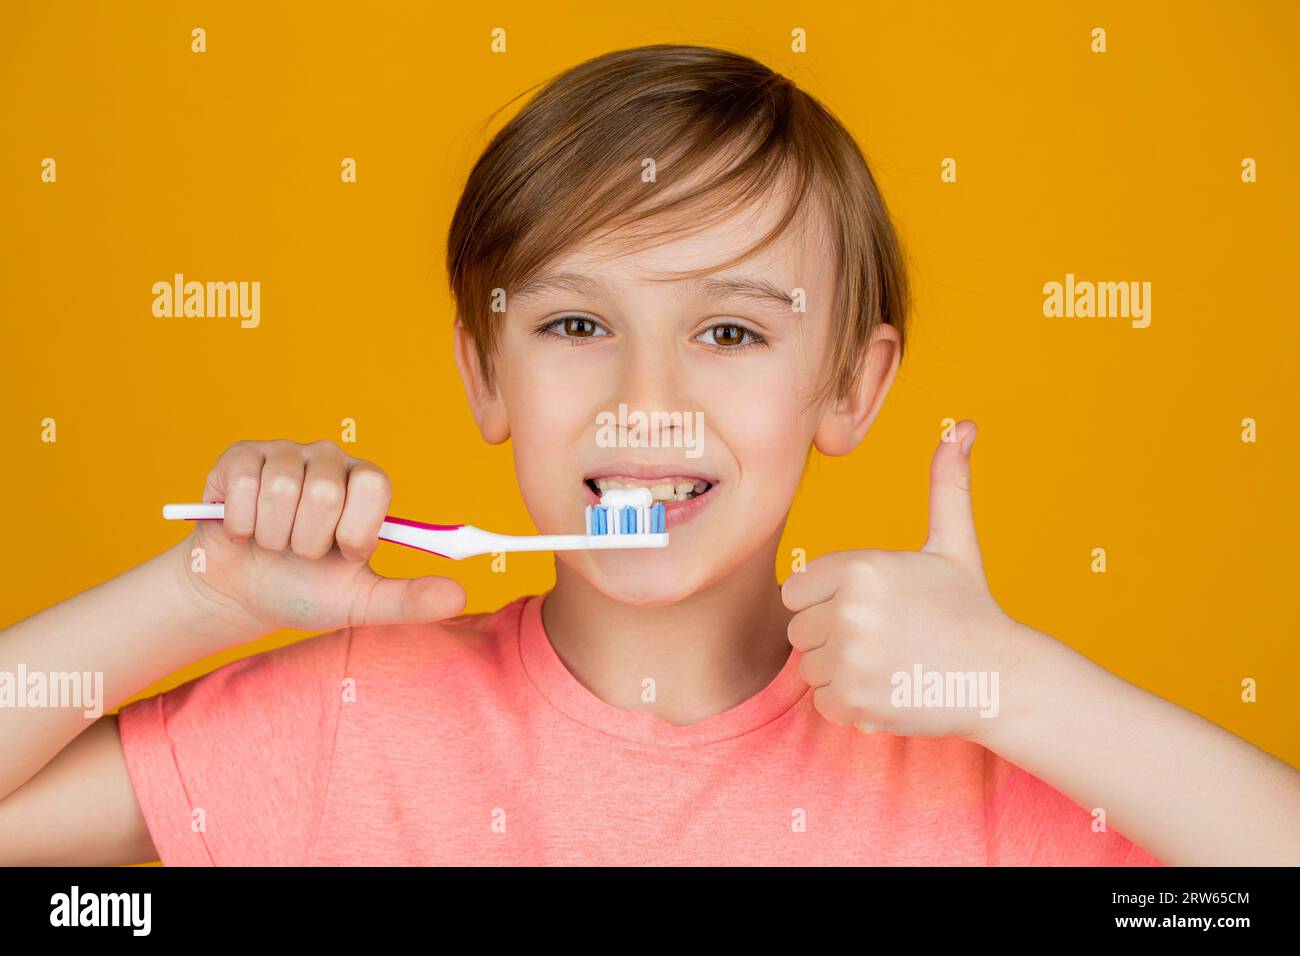 Boy toothbrush white toothpaste. Joyful child shows toothbrushes, shows a thumbs up. Little boy cleaning teeth. Dental hygiene. Happy little kid Stock Photo